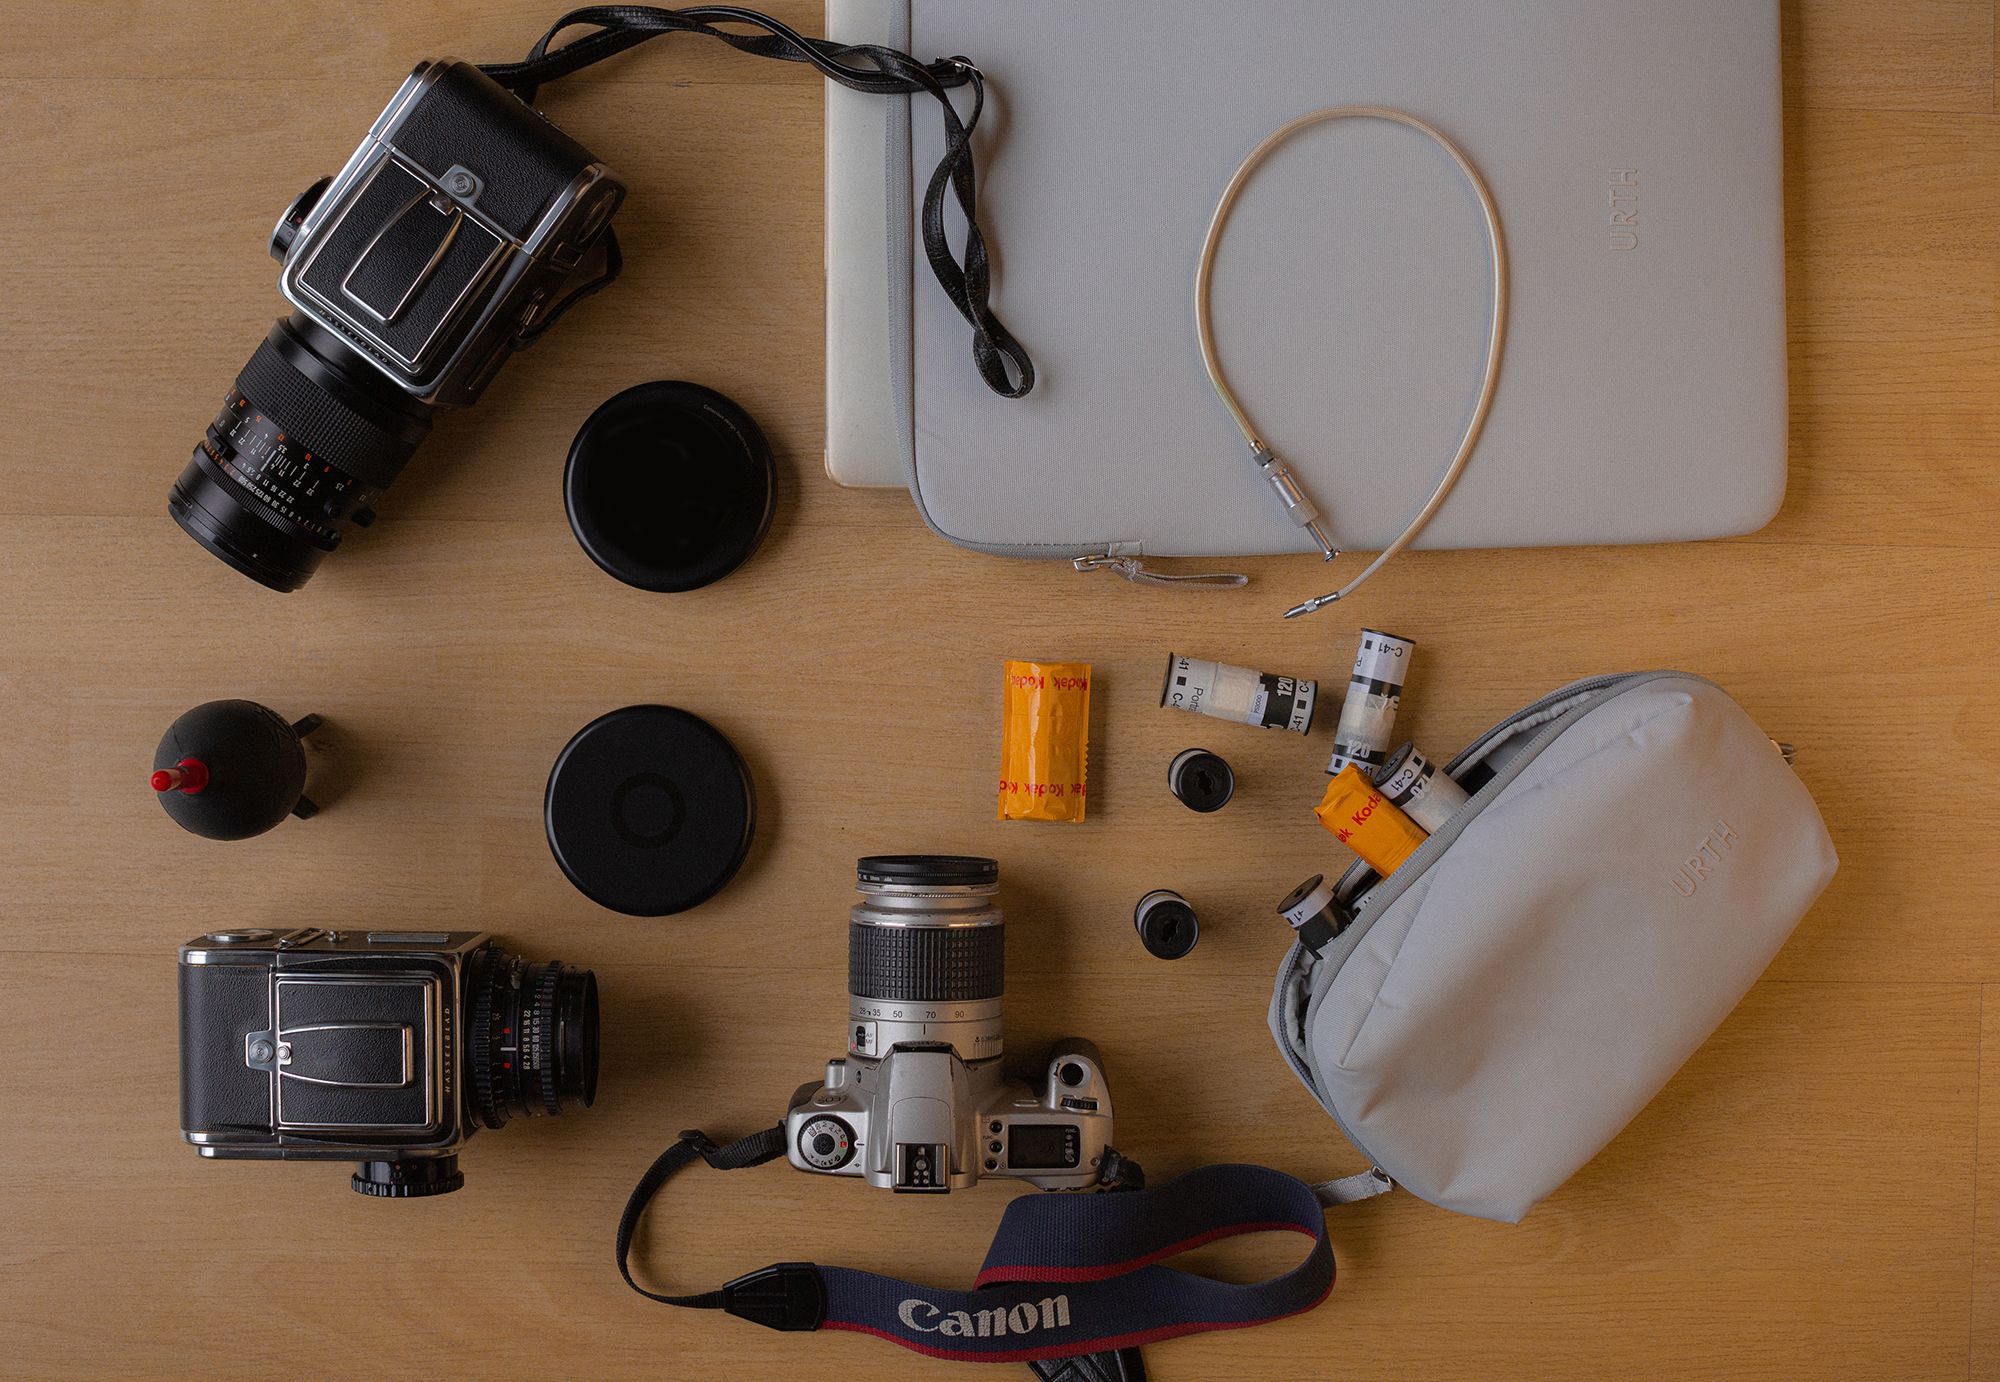 The 11 Pieces of Gear Chiara Zonca Uses For a Photoshoot